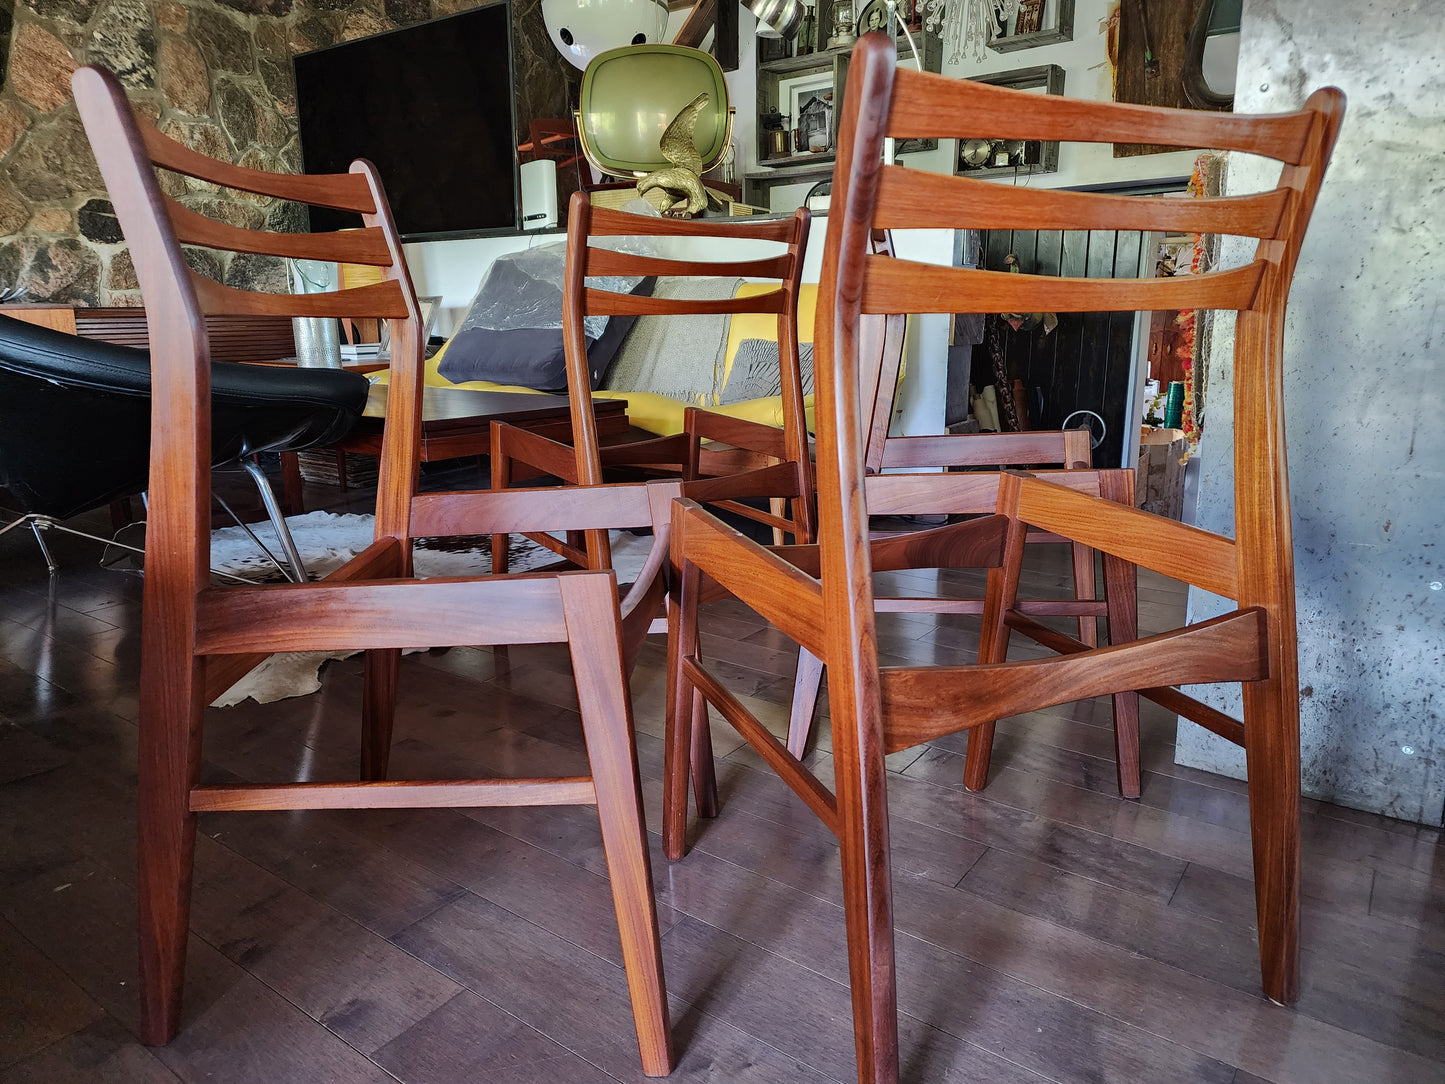 6 REFINISHED will be REUPHOLSTERED Danish Mid Century Modern Teak Chairs Ladder Back